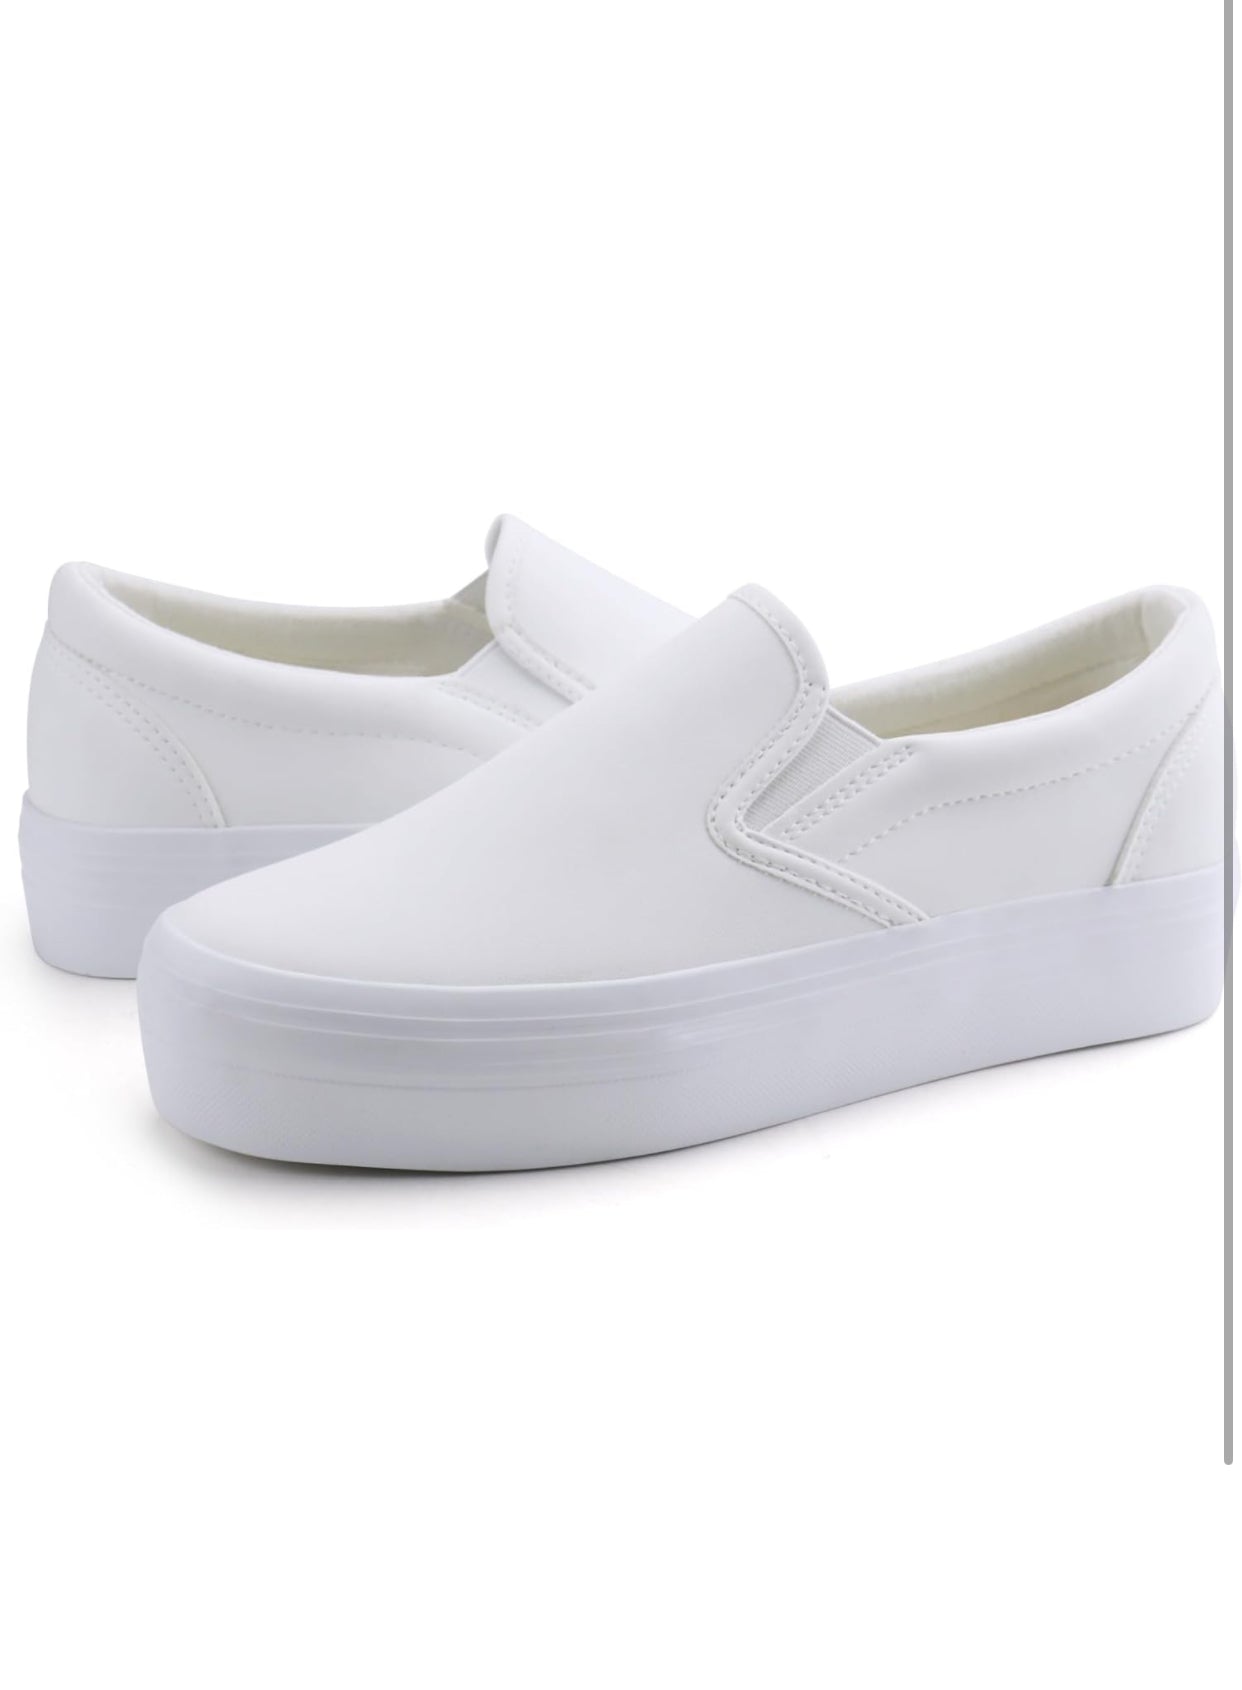 THE EDITION SHOE - WHITE